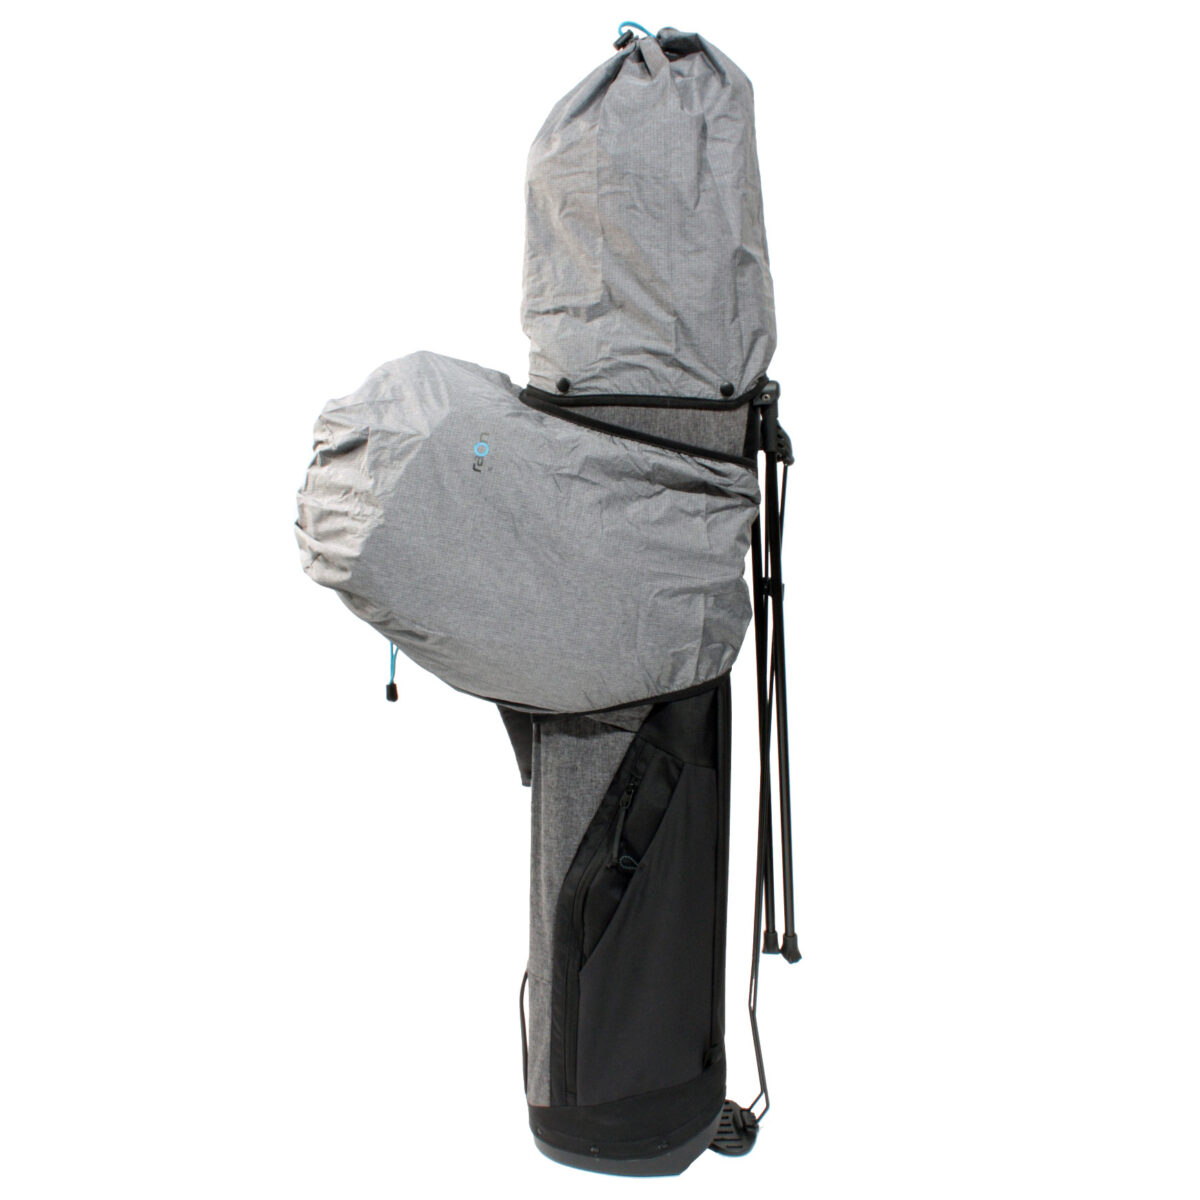 The Raon Golf pack stands upright with both rain covers attached to keep the backpack and clubs dry